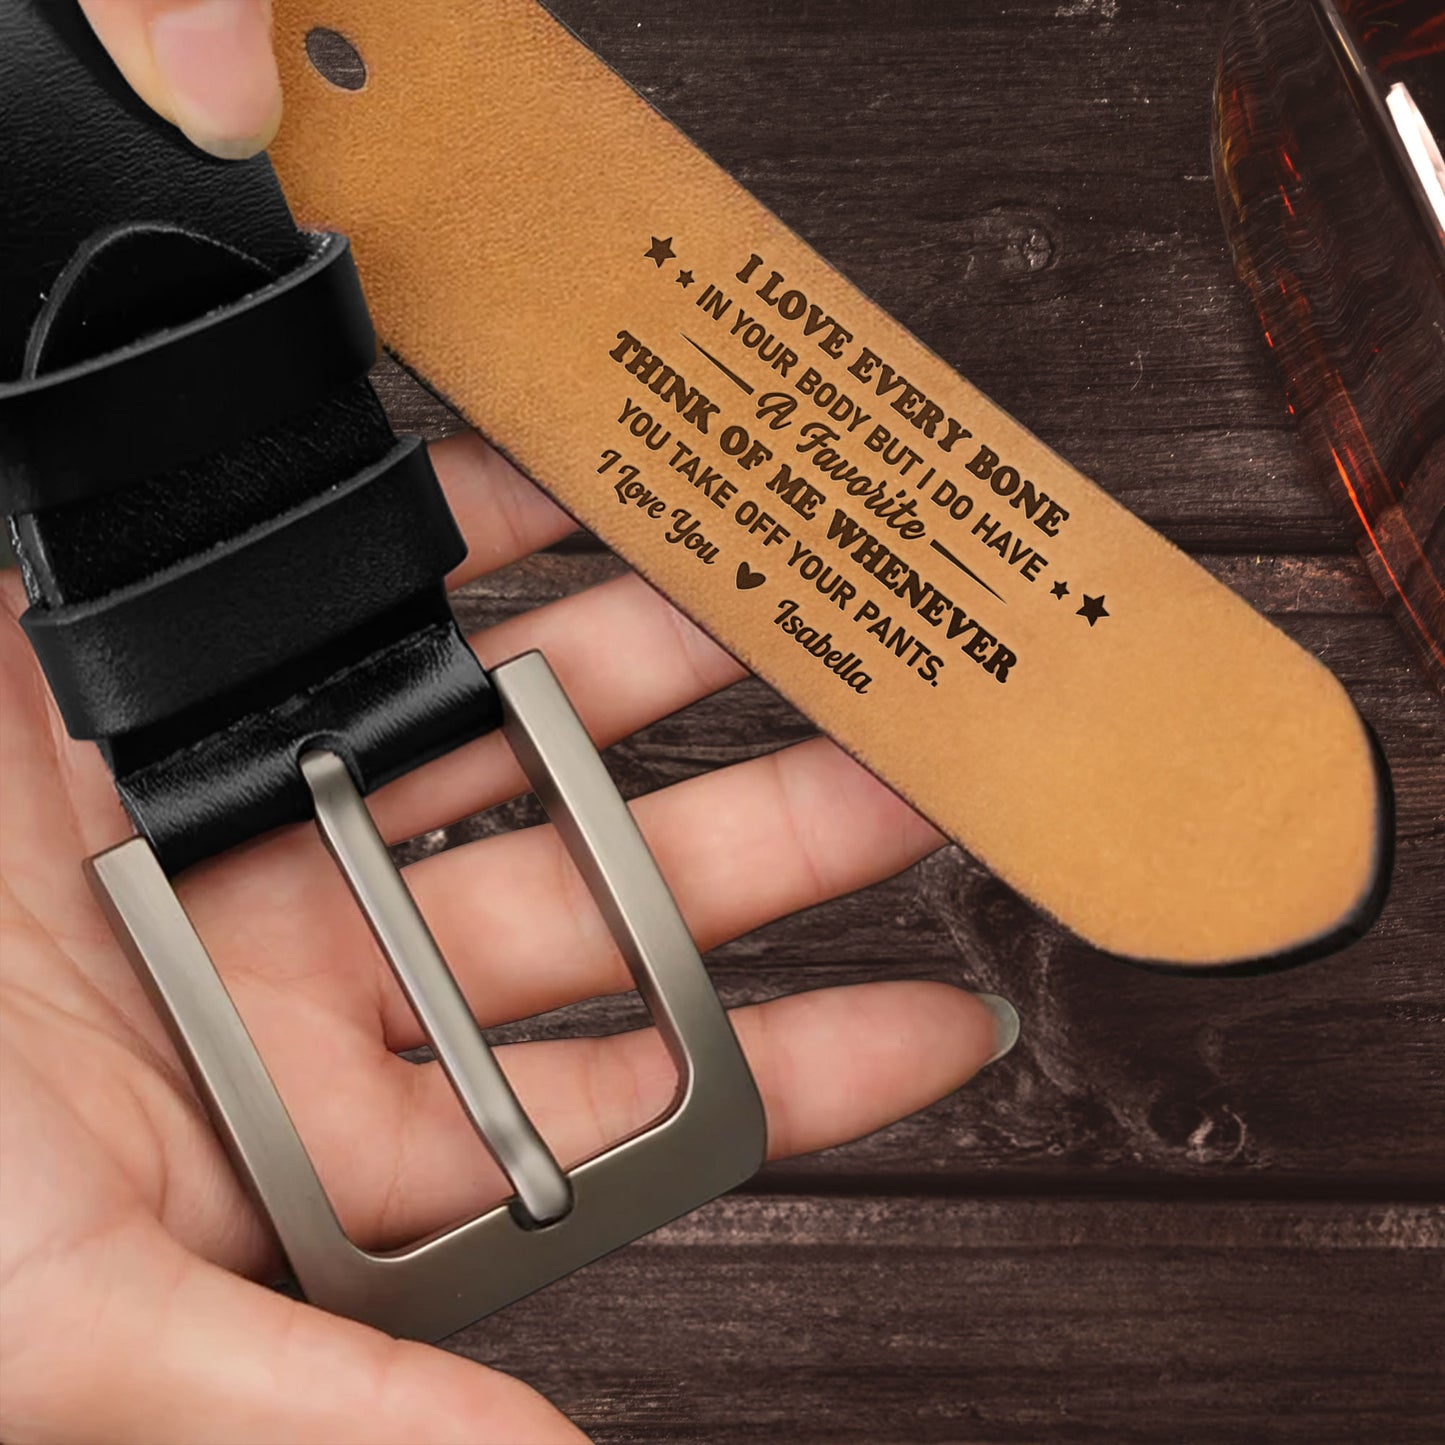 I Love Every Bone In Your Body - Personalized Engraved Leather Belt